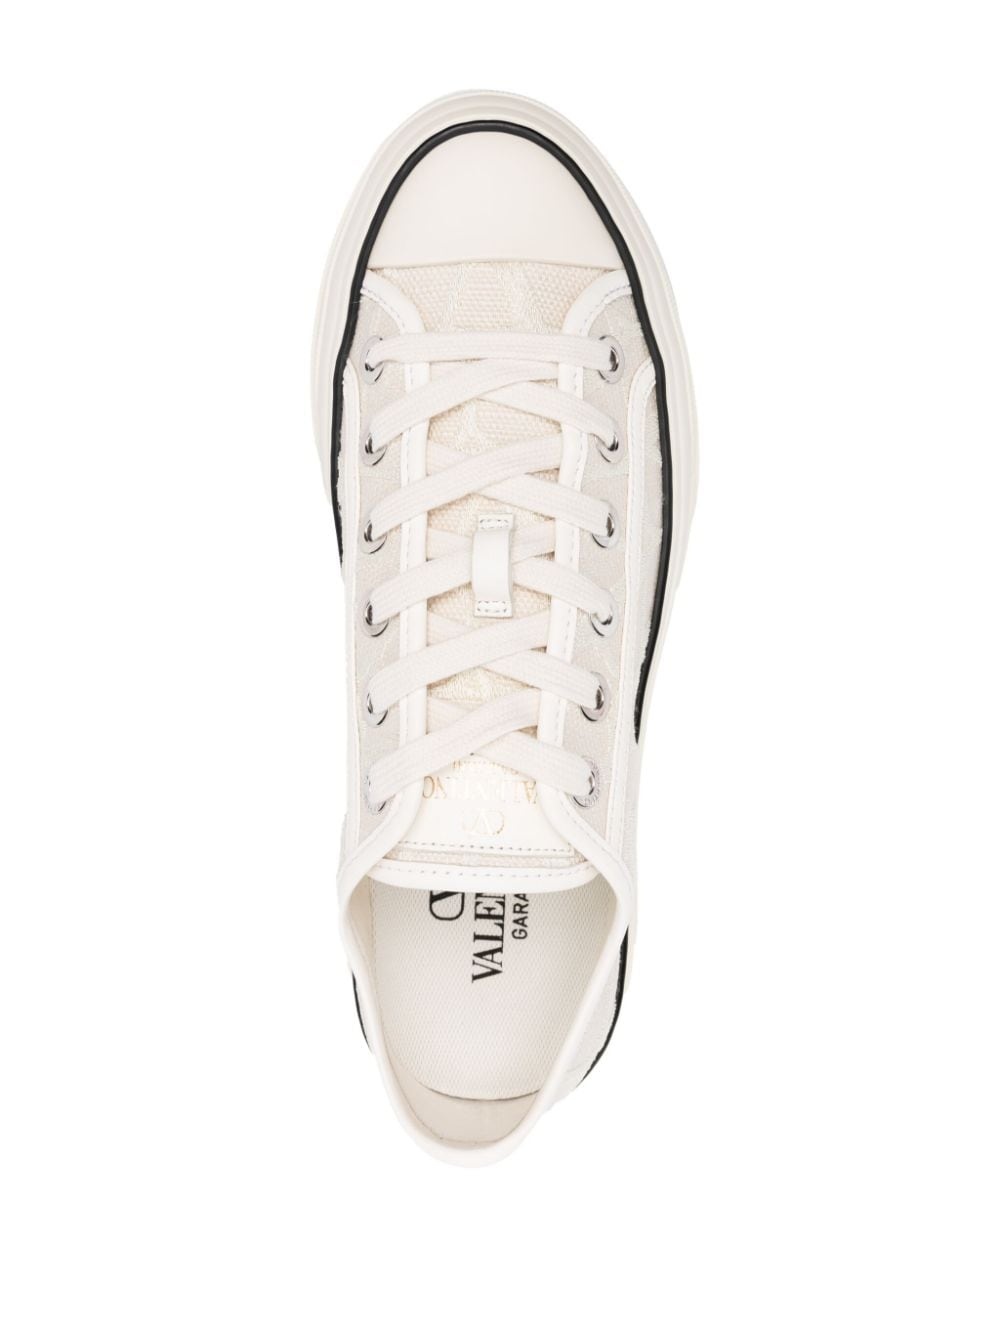 platform-sole lace-up sneakers - 4